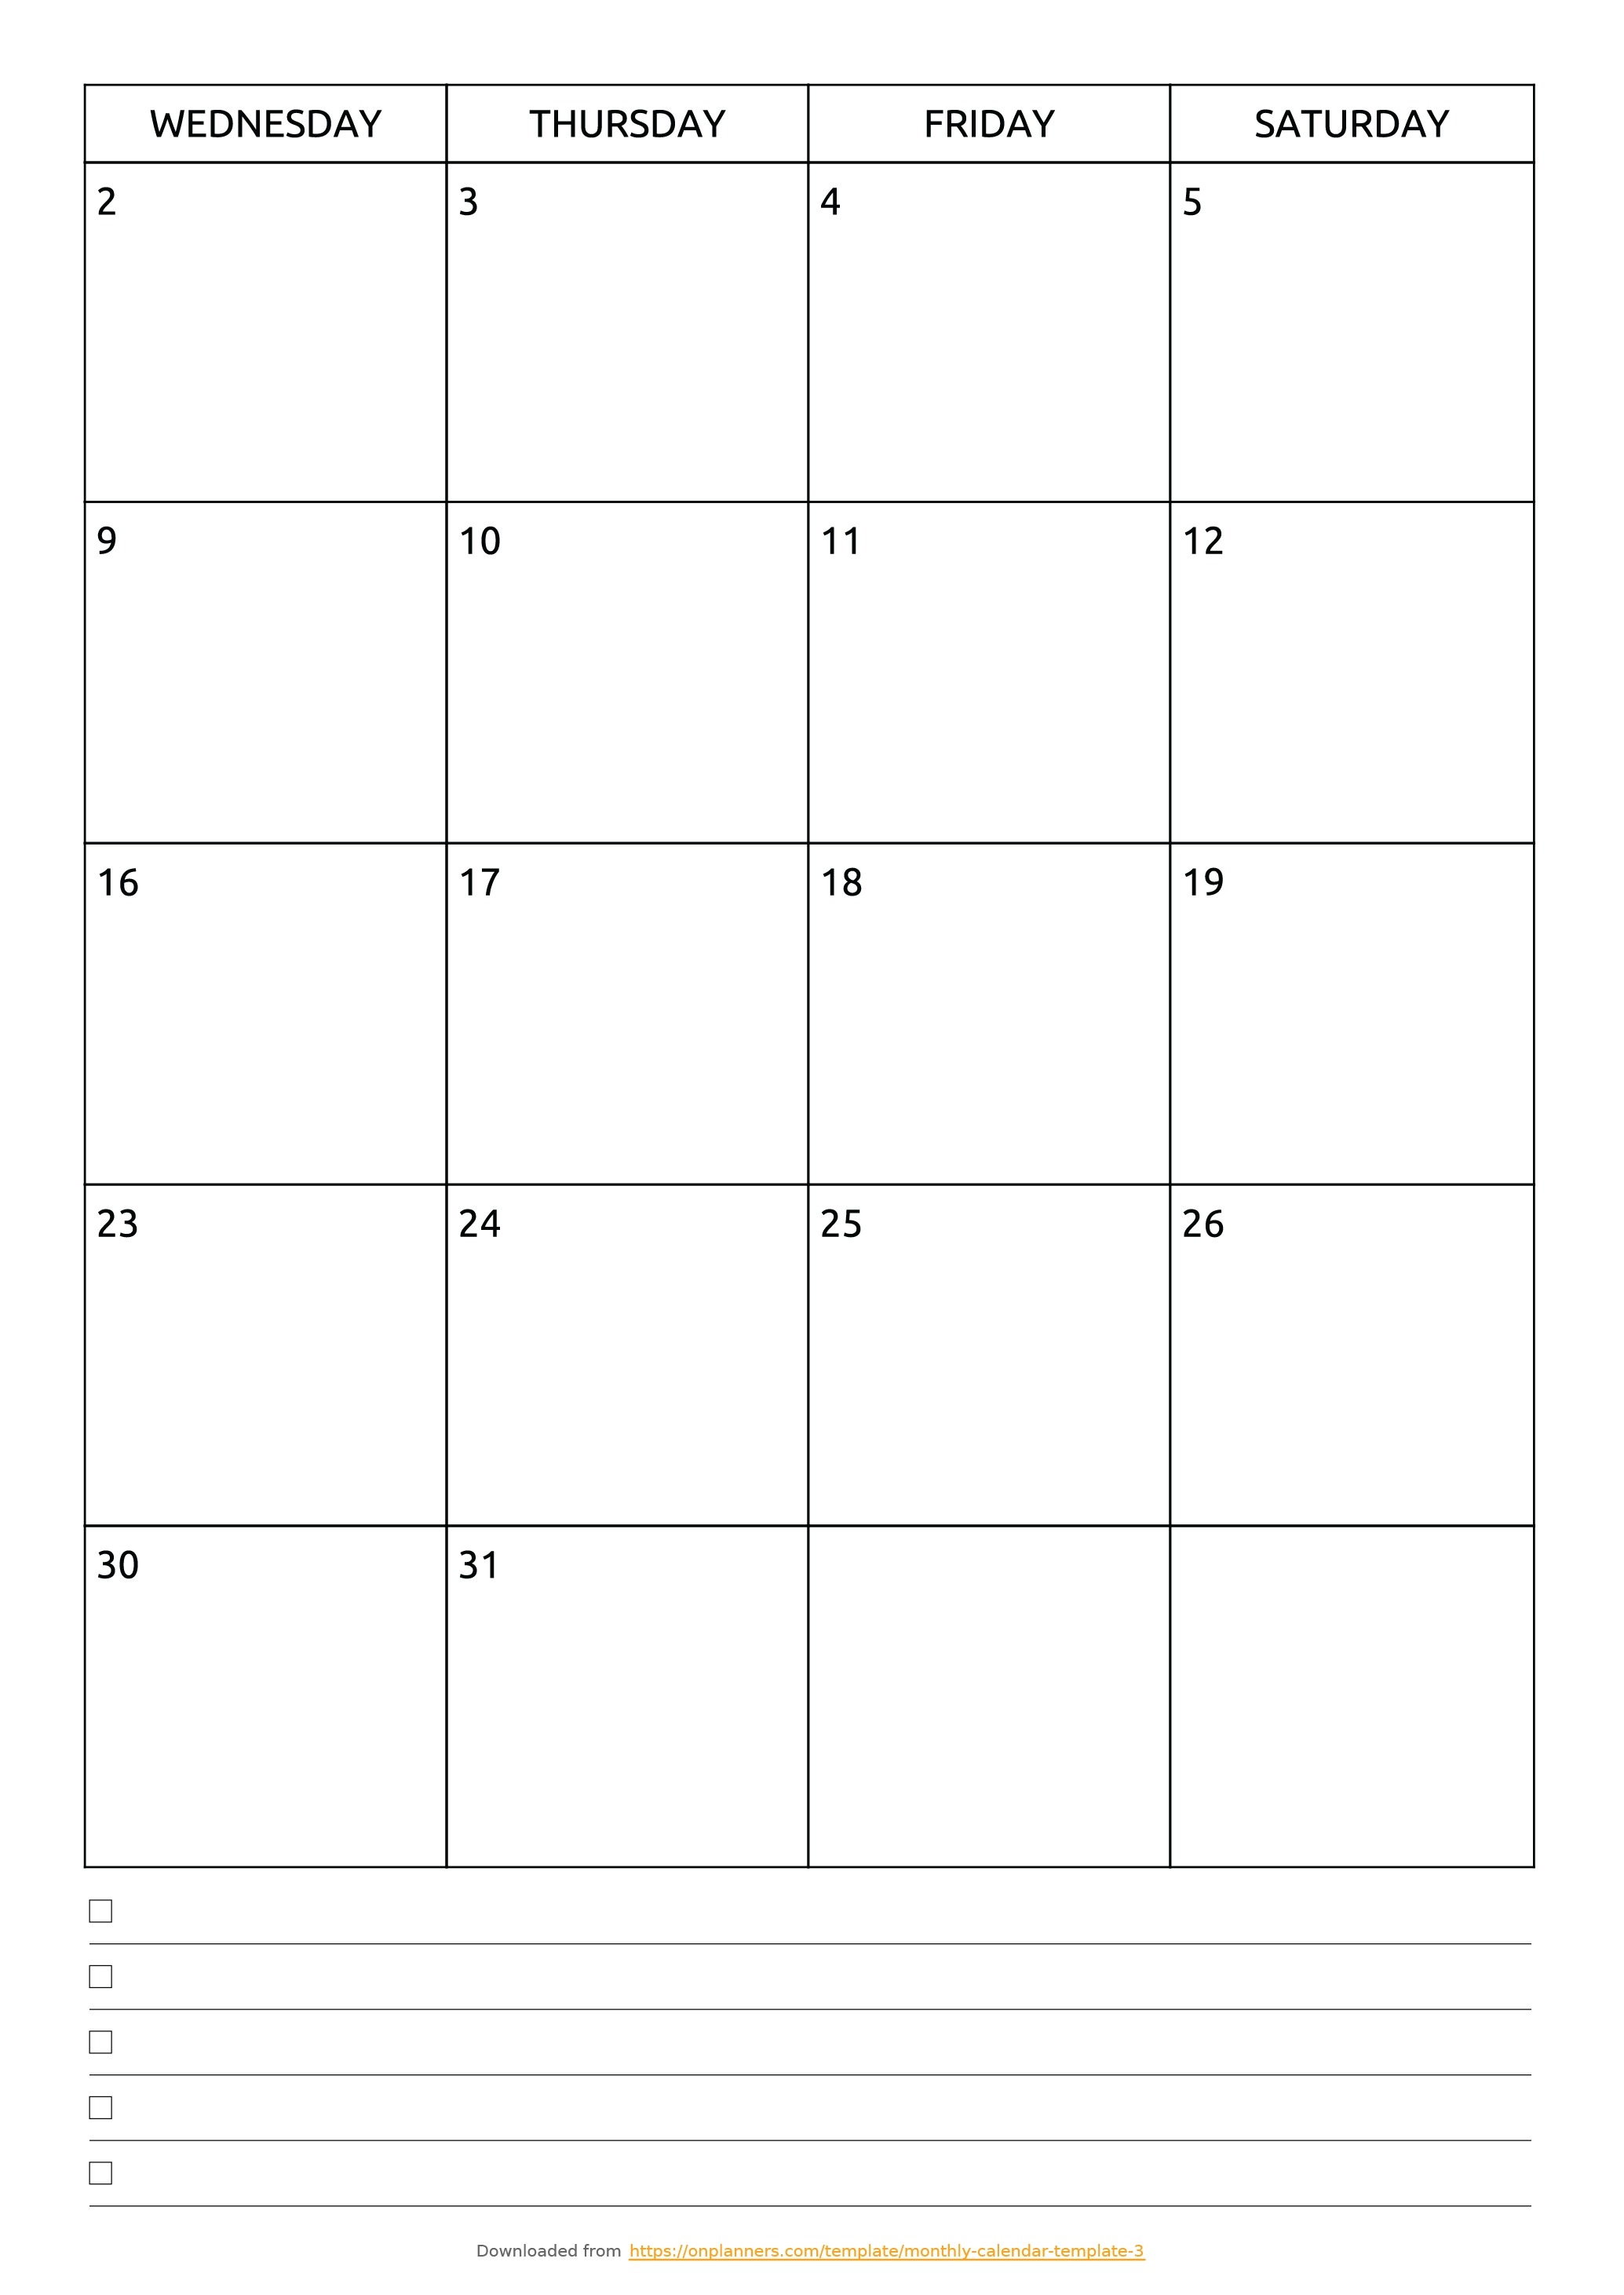 Free Printable Monthly Calendar With Notes Pdf Download within Blank Calendar Template With Notes